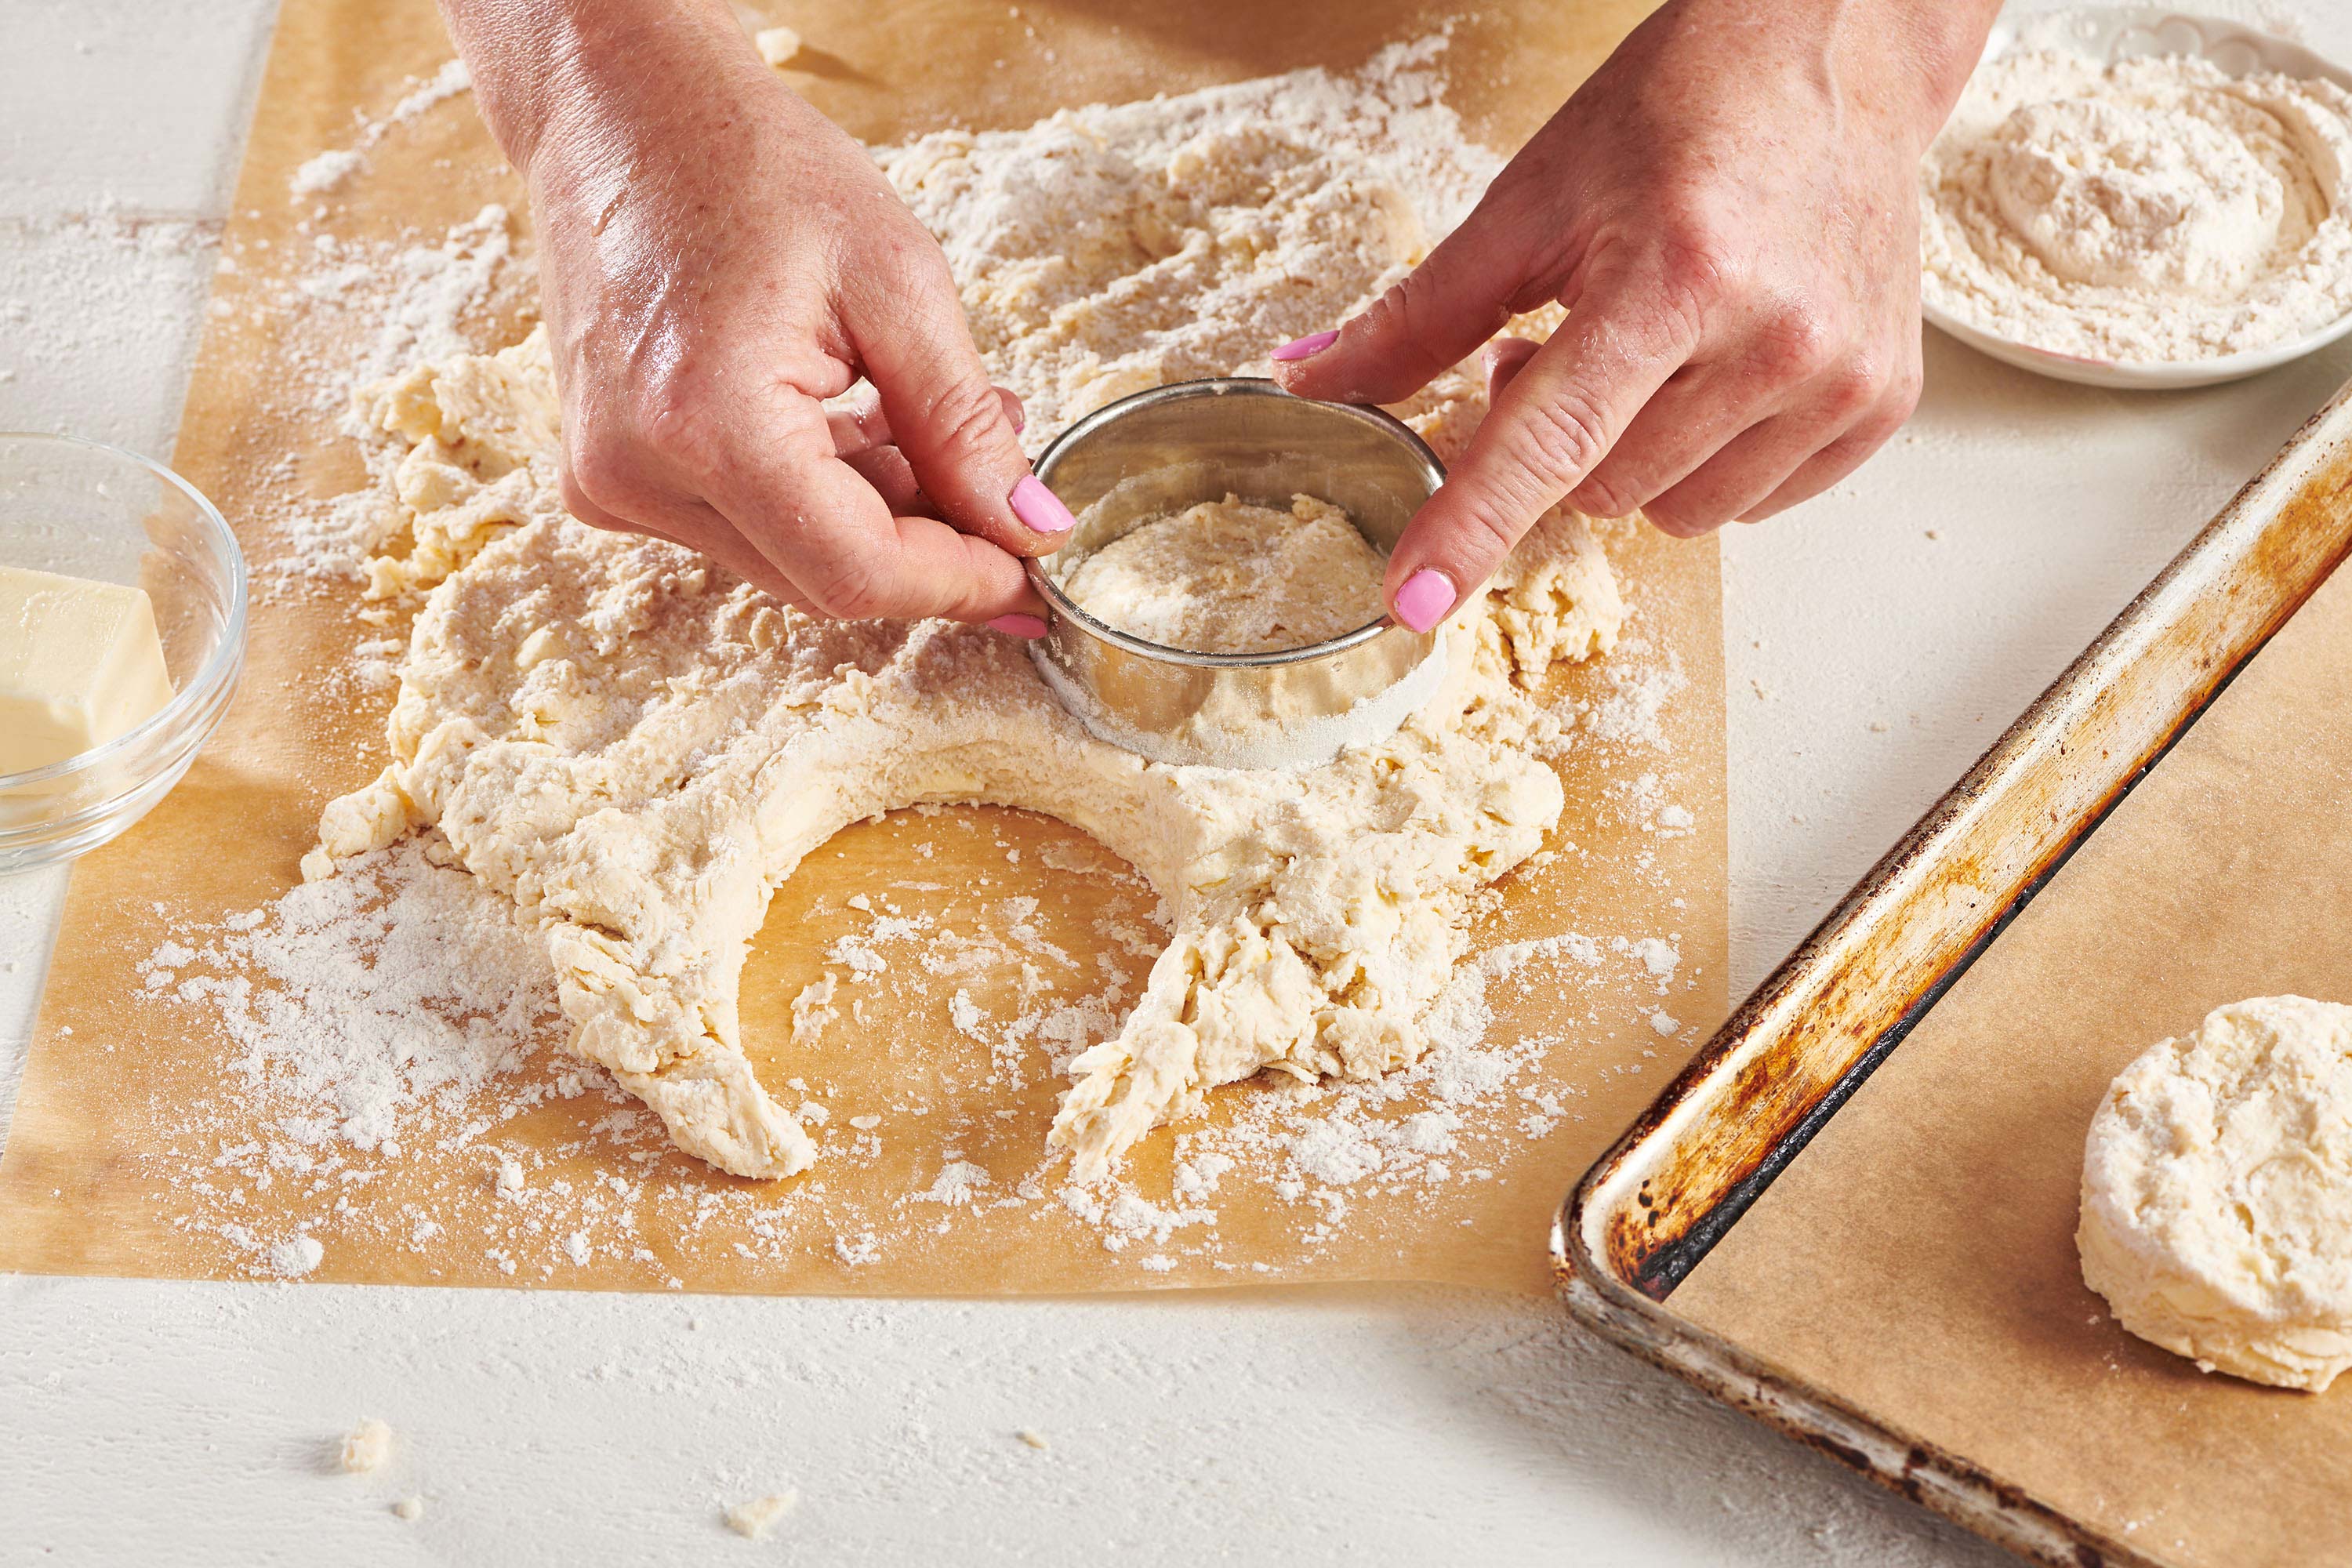 Woman cutting circles out of biscuit dough.